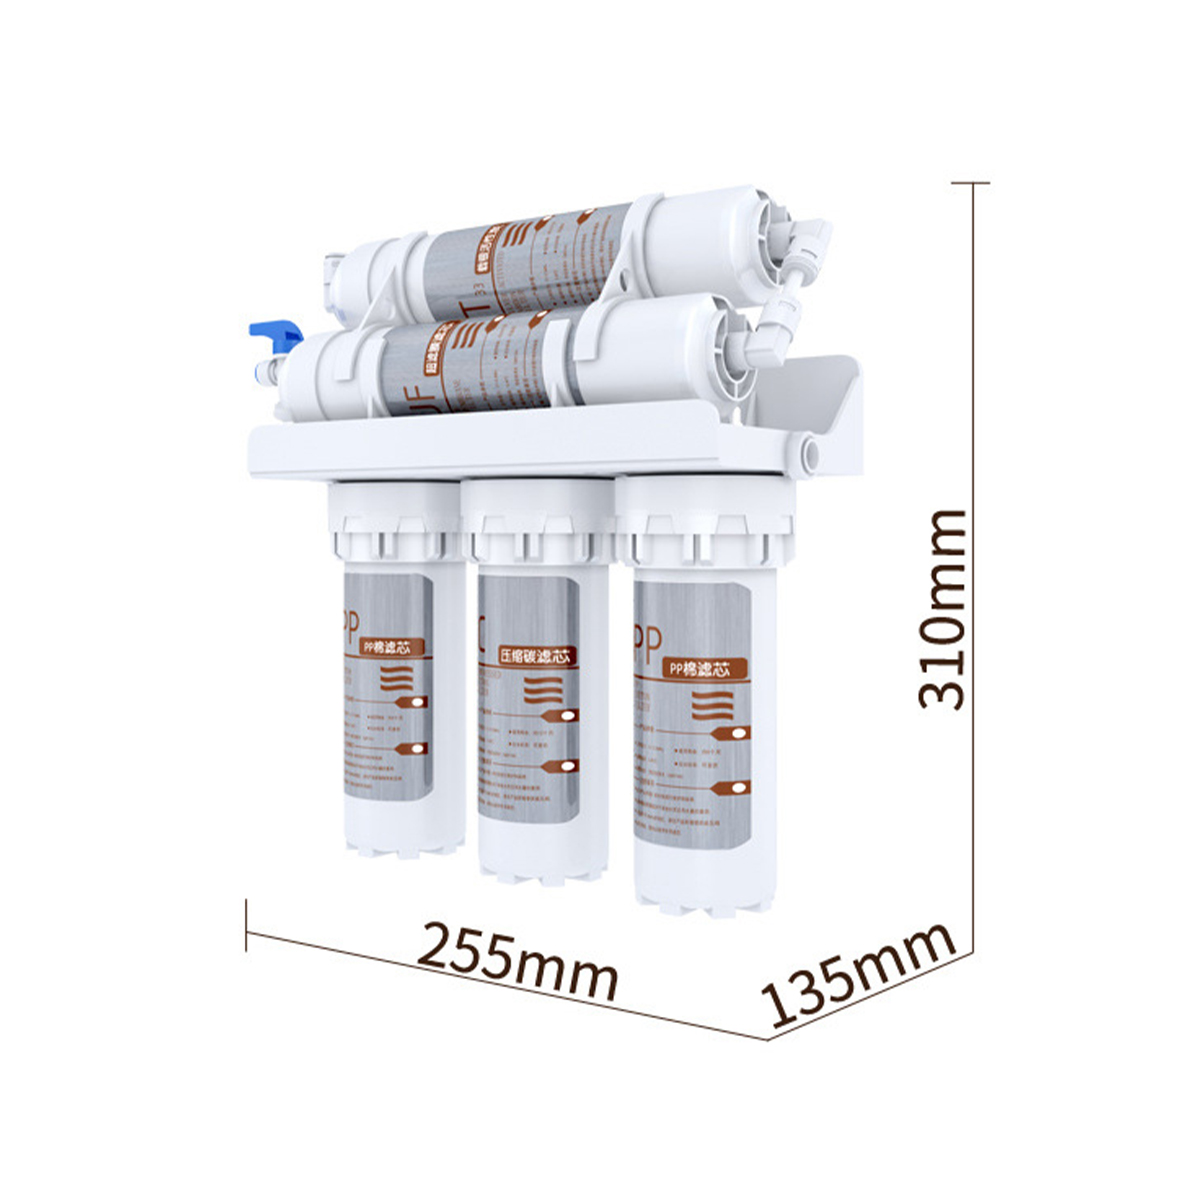 3+2 5 Drinking Water Filter Ultrafiltration System Home Kitchen Purifier Water Filters Faucet Tap Household Filtration Kit